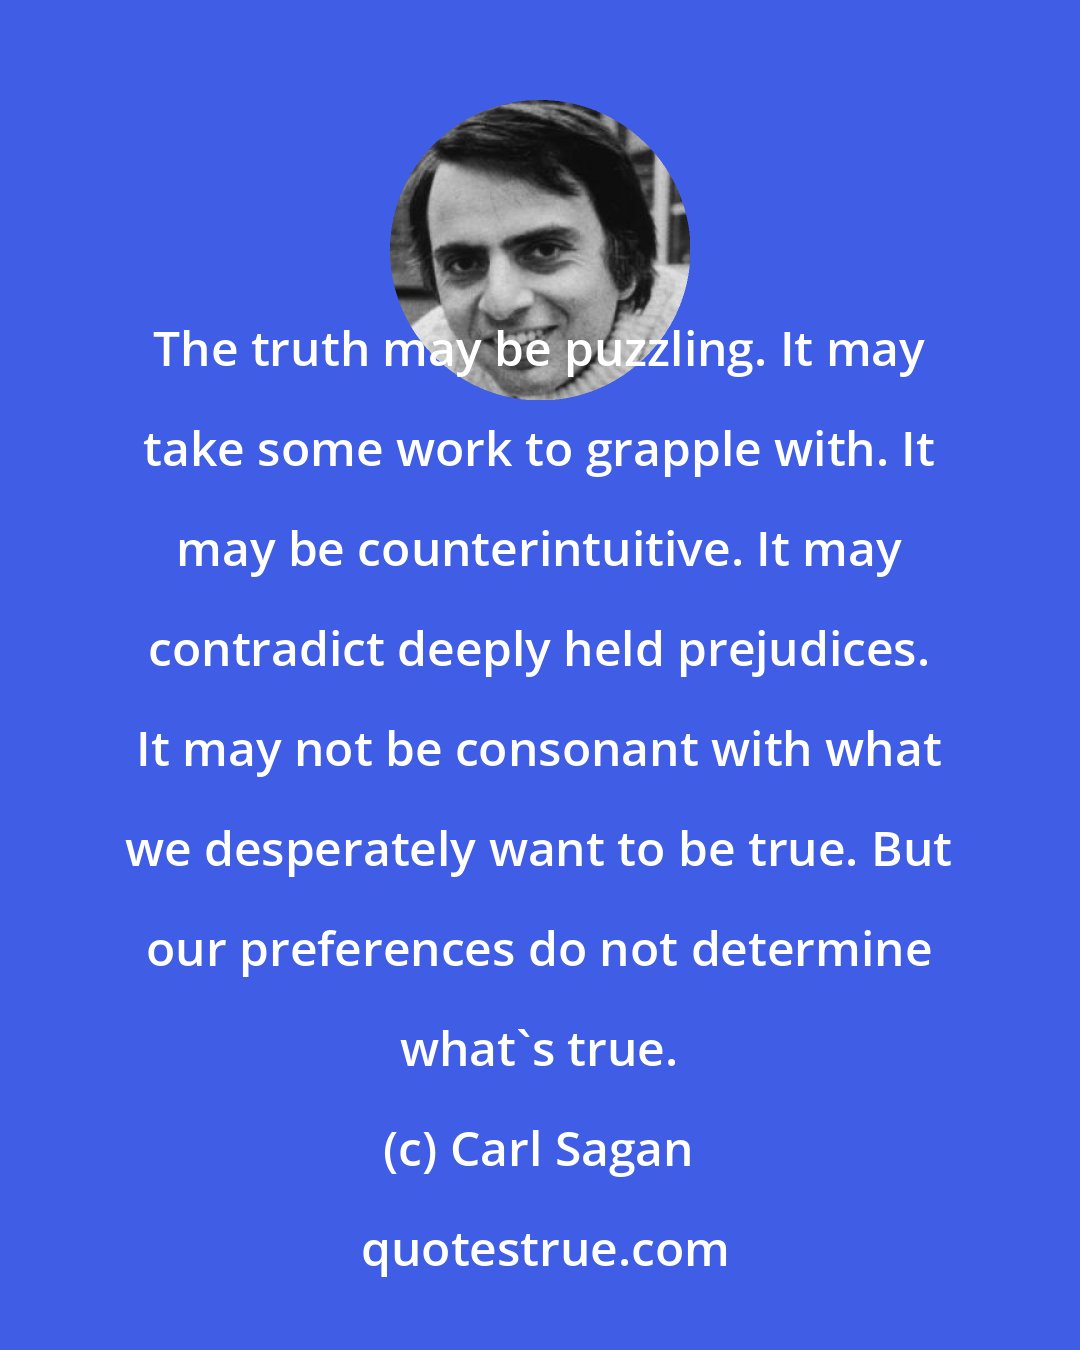 Carl Sagan: The truth may be puzzling. It may take some work to grapple with. It may be counterintuitive. It may contradict deeply held prejudices. It may not be consonant with what we desperately want to be true. But our preferences do not determine what's true.